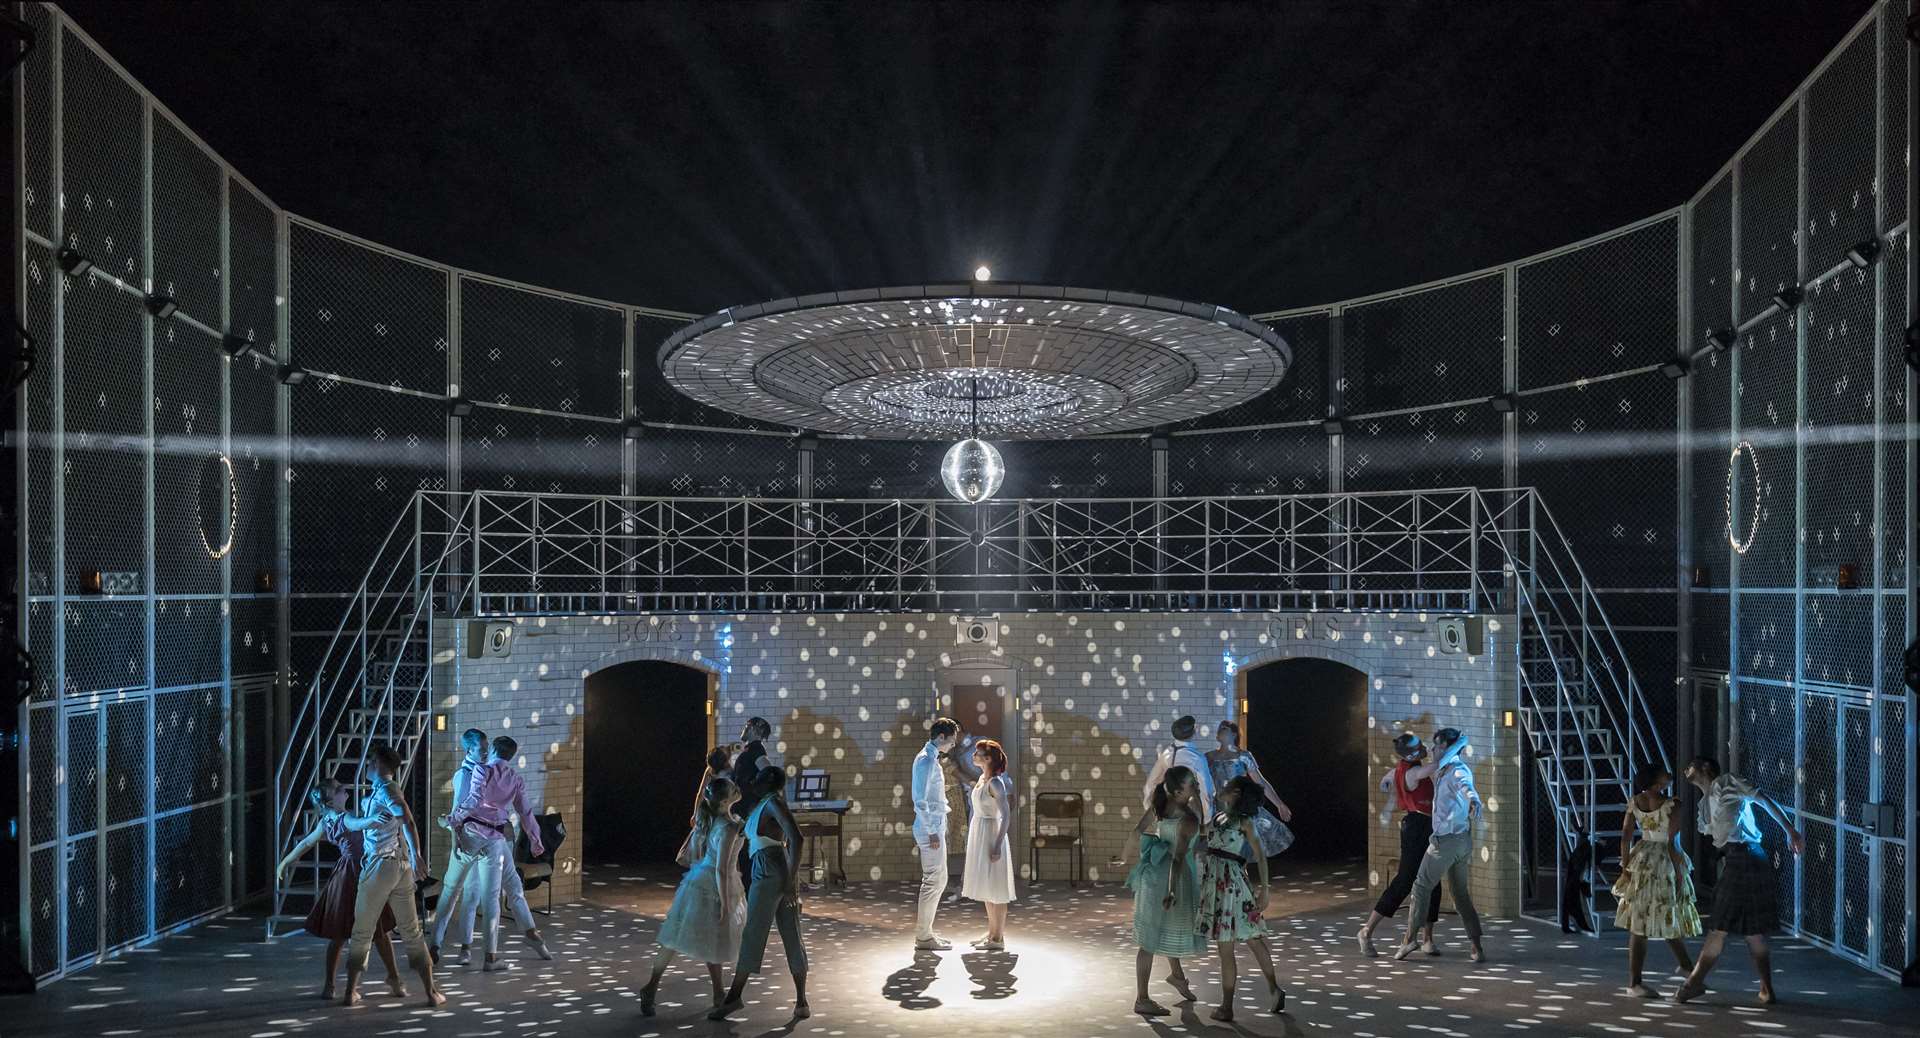 Romeo and Juliet met under the discoball at the Verona Institute dance. Matthew Bourne's Romeo and Juliet at the Marlowe Theatre. Credit: Johan Persson